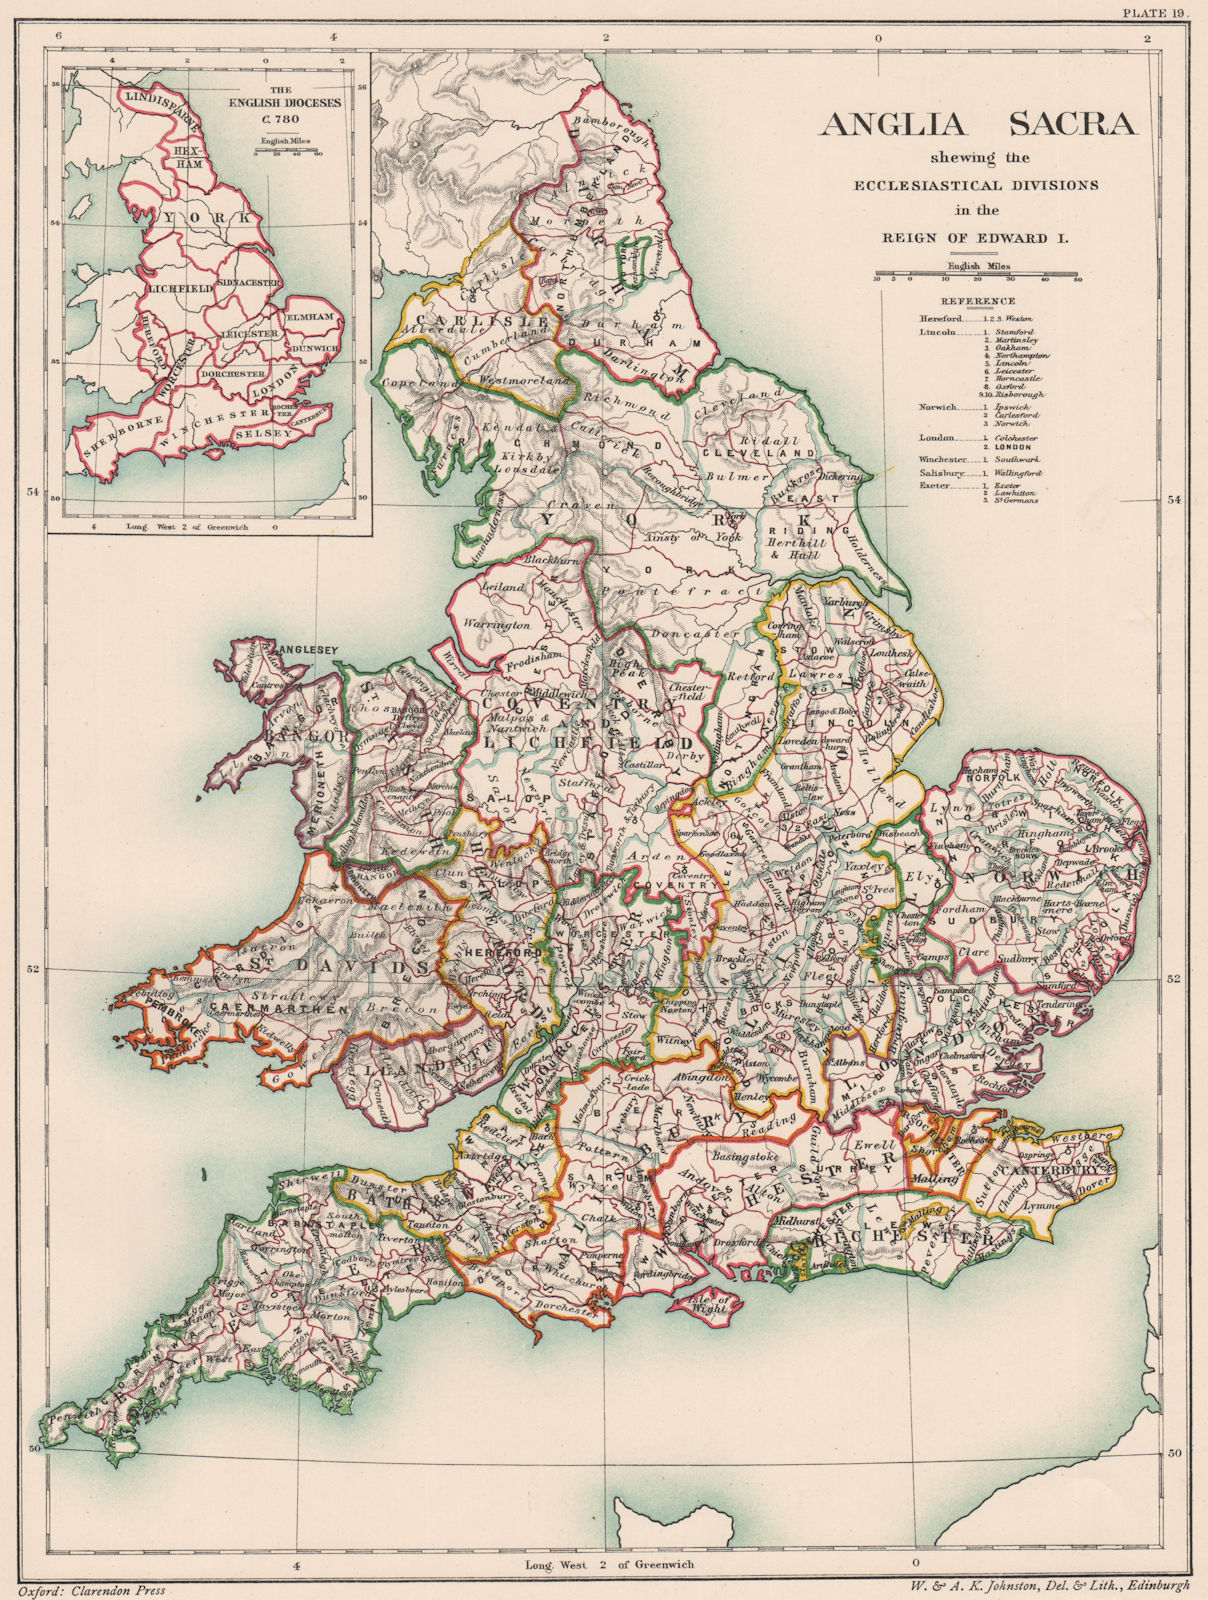 ANGLIA SACRA. Ecclesiastical divisions in England of King Edward I 1902 map